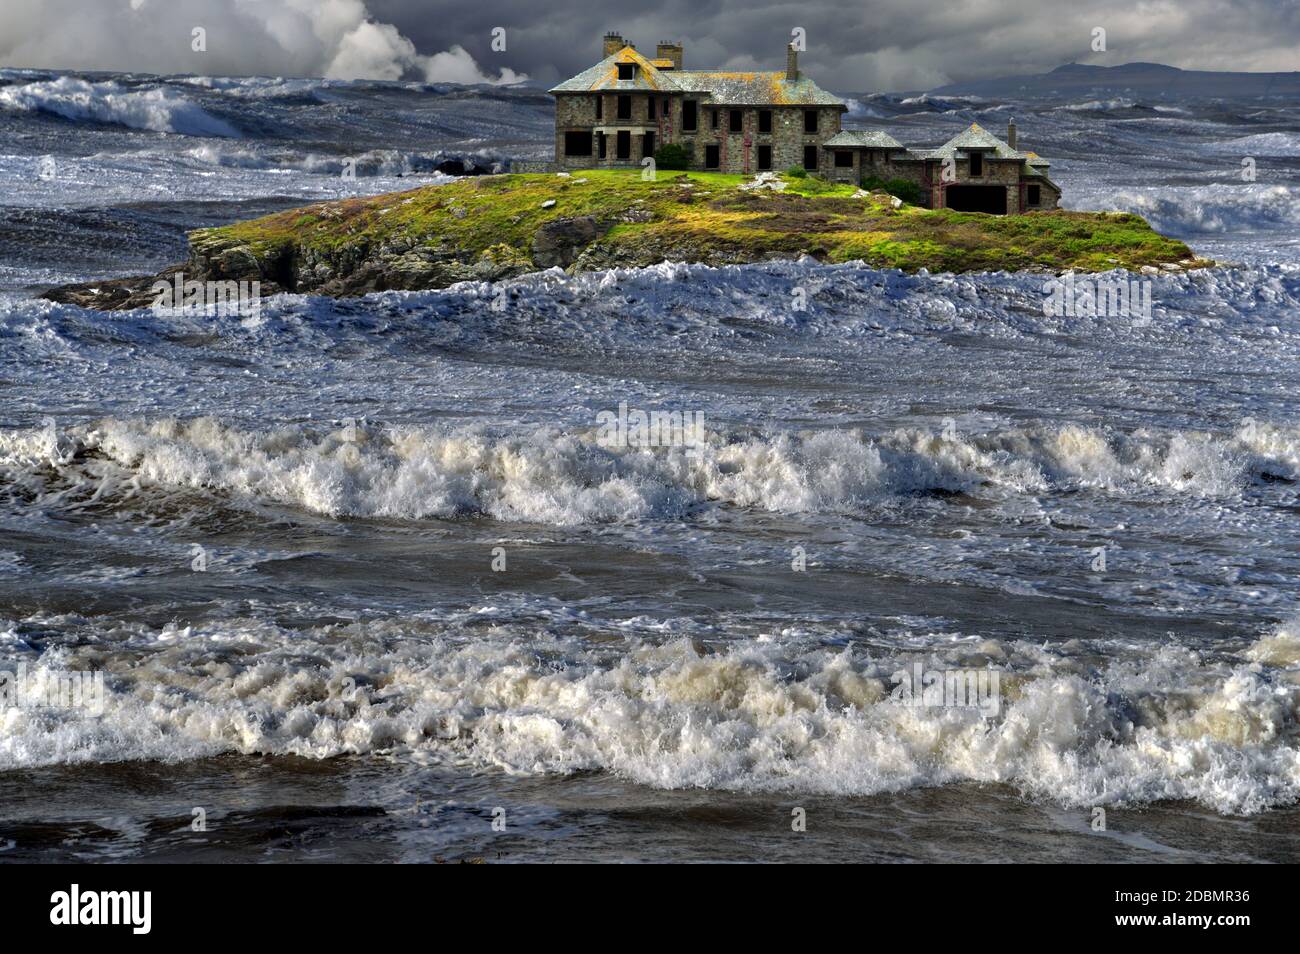 This fantasy image of a spooky island and house in wild weather is based on Craig y Mor in Trearddur Bay on Holy Island, Anglesey, North Wales. Stock Photo